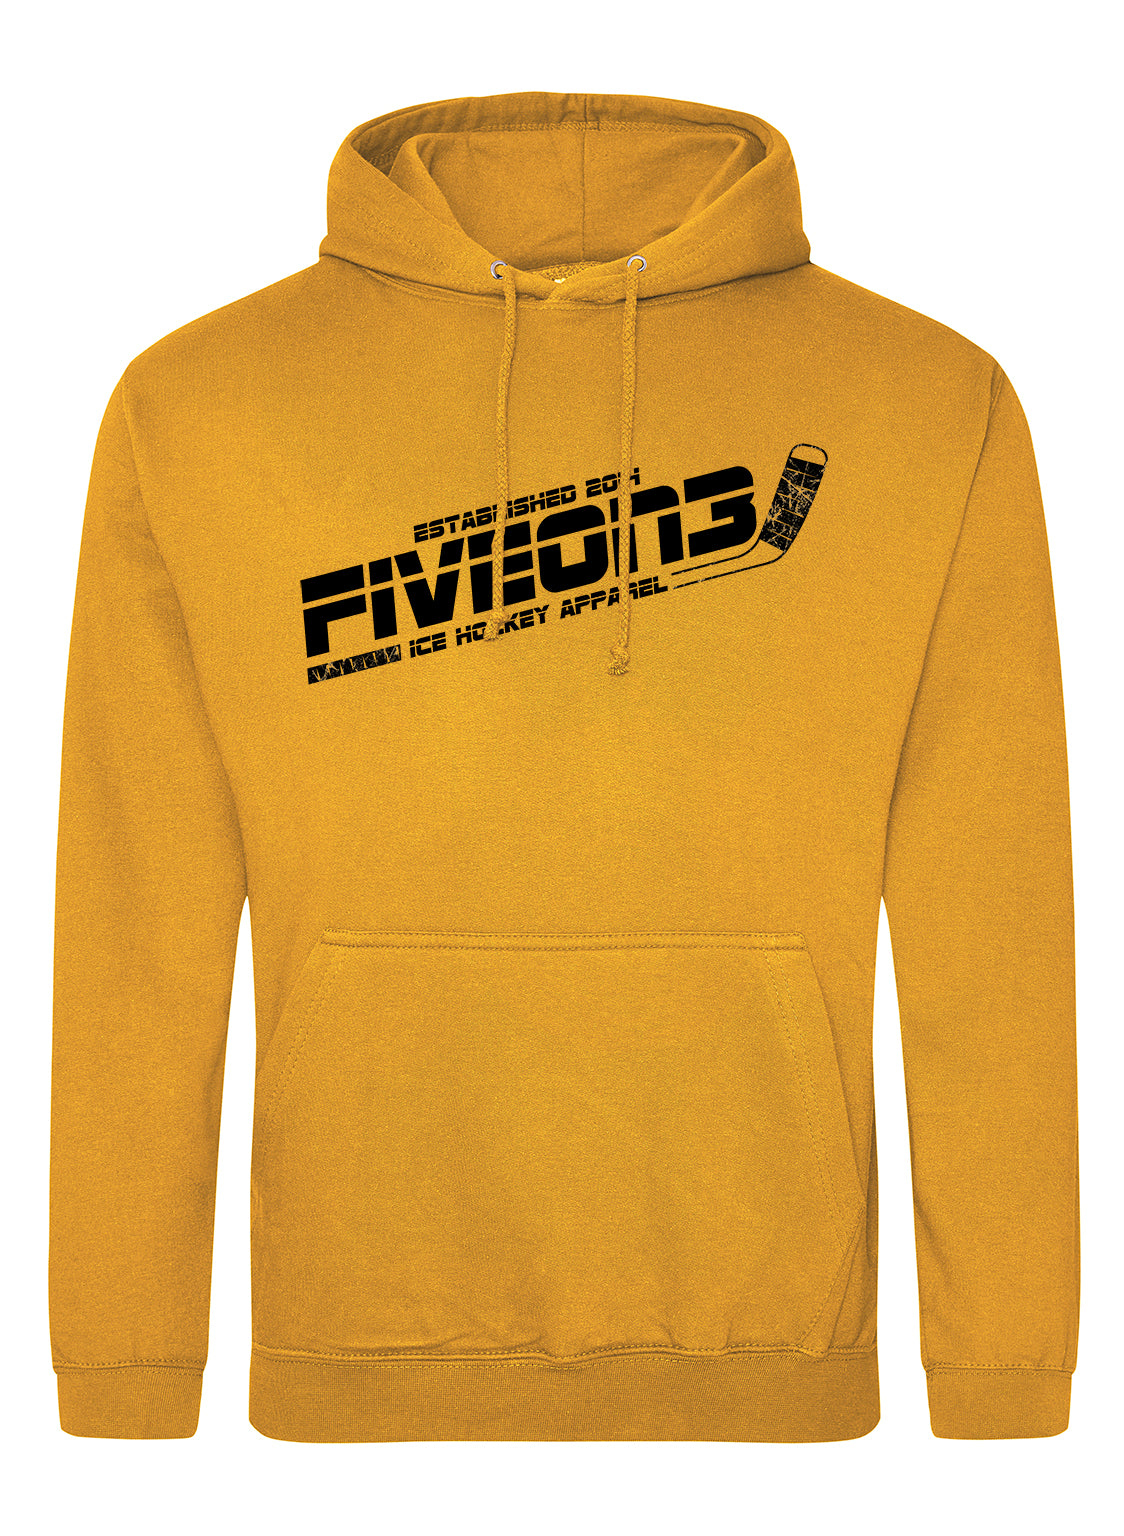 Over Time Hooded Sweat Top